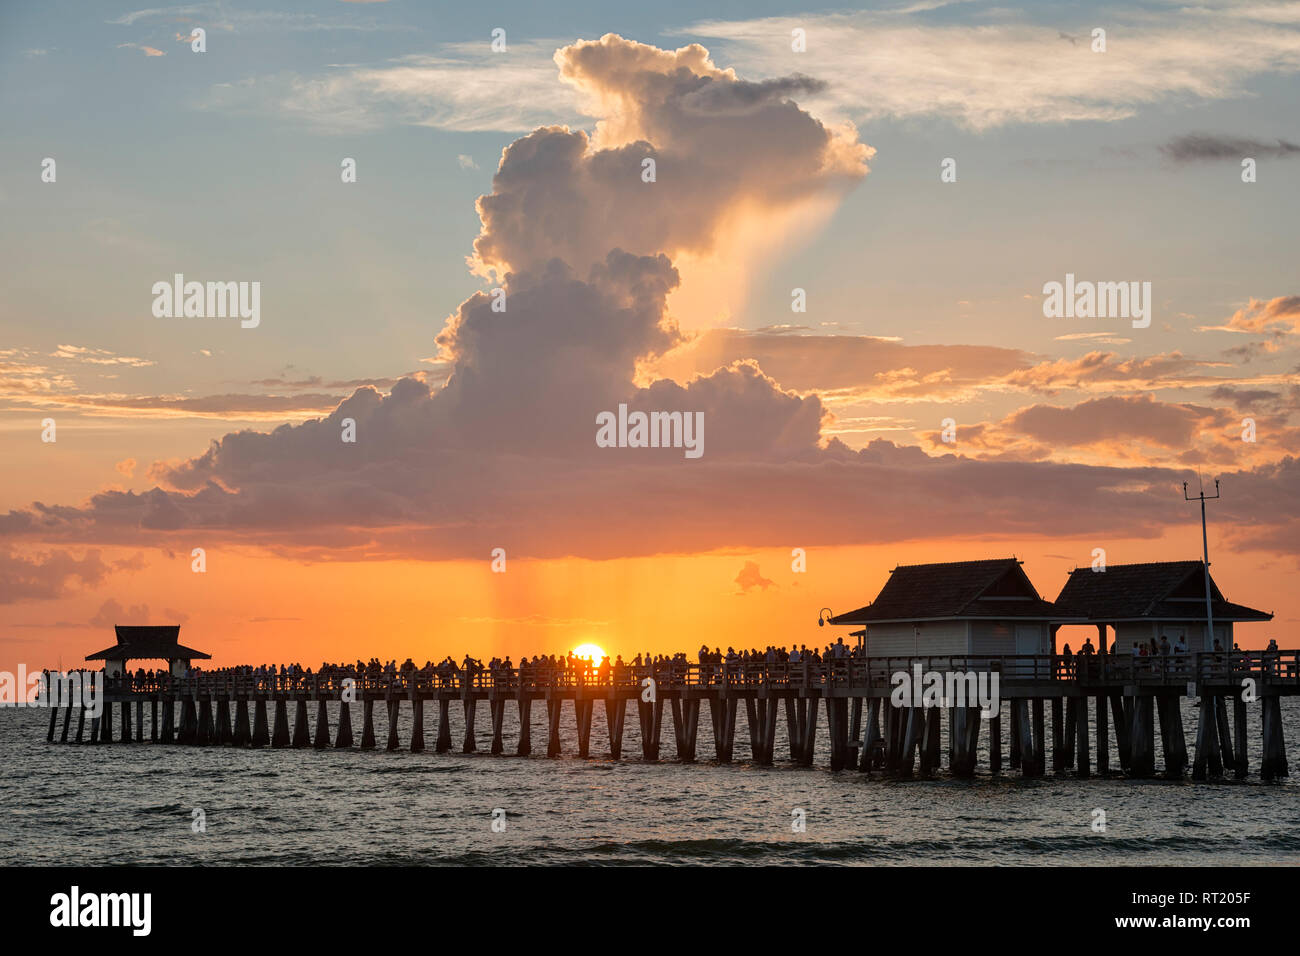 United States of America, Florida, Naples, silhouettes of Naples Pier and tourists with a huge rain cloud above during sunset Stock Photo